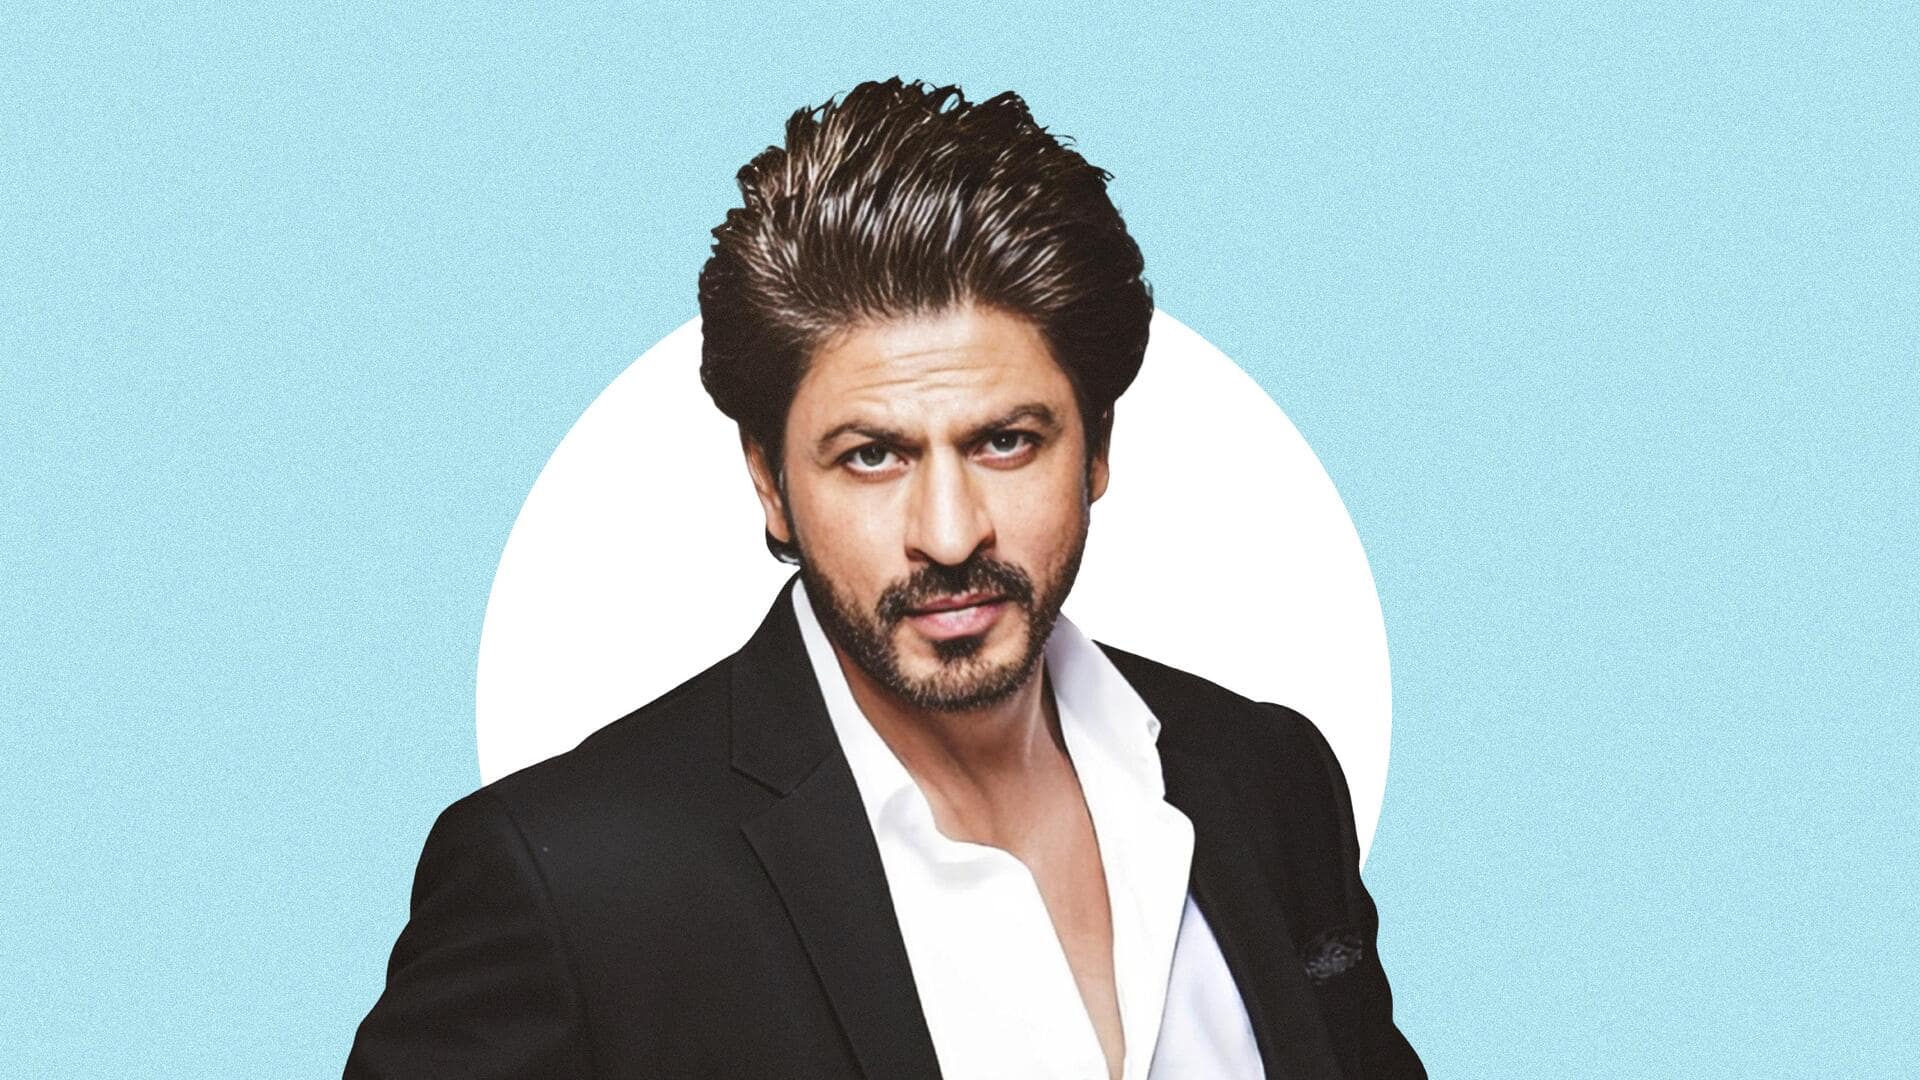 Shah Rukh Khan's birthday: Times he impressed us with wit